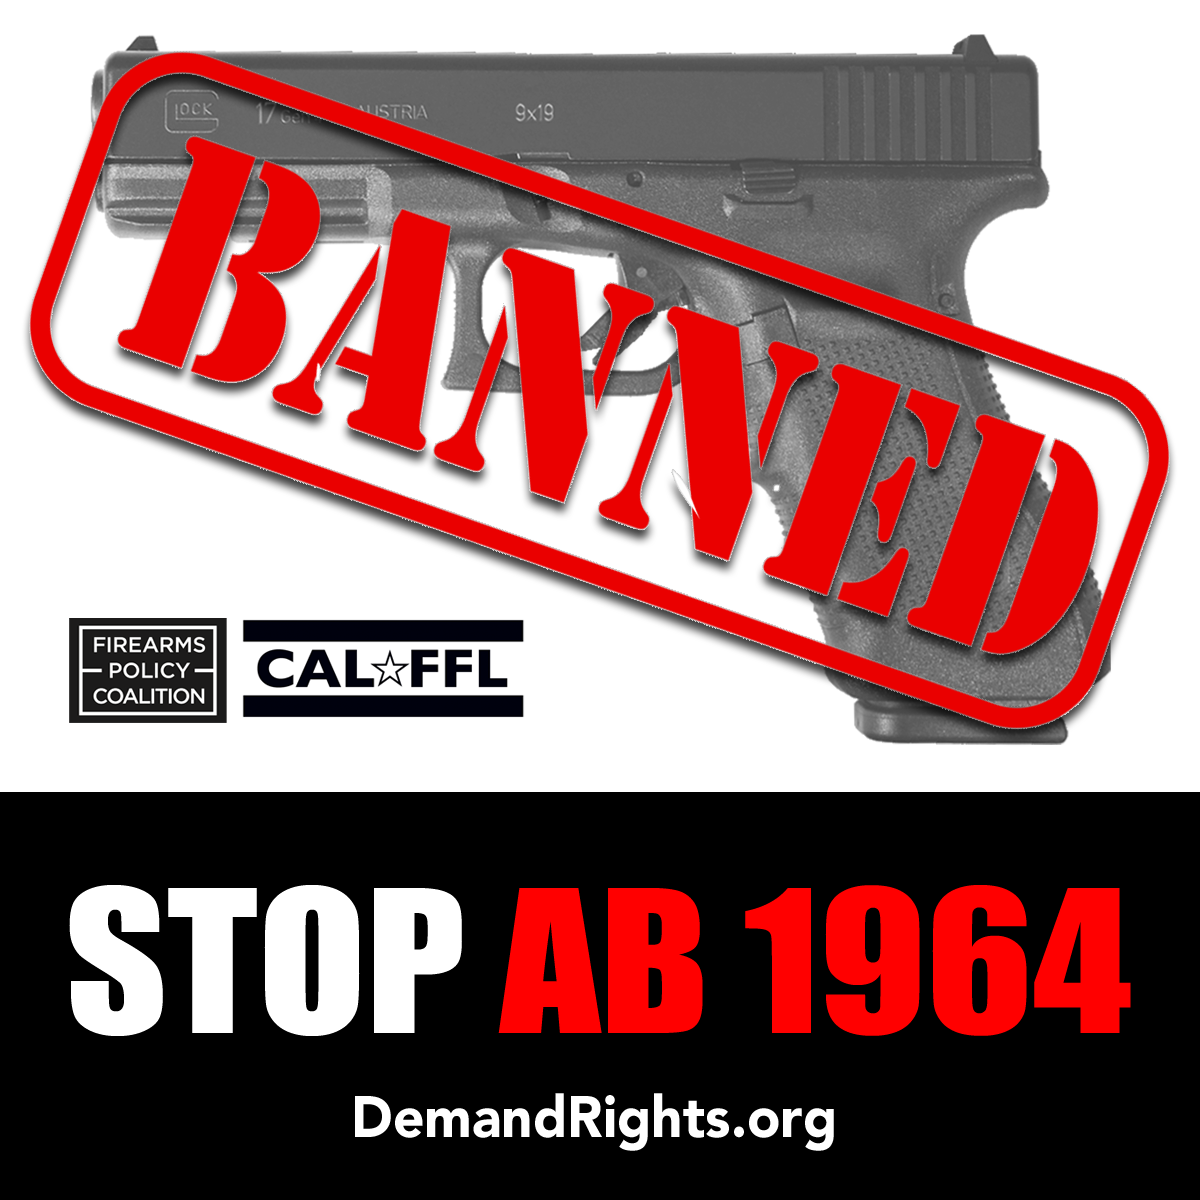 AB 1964 would ban most all modern firearms from sale in California.